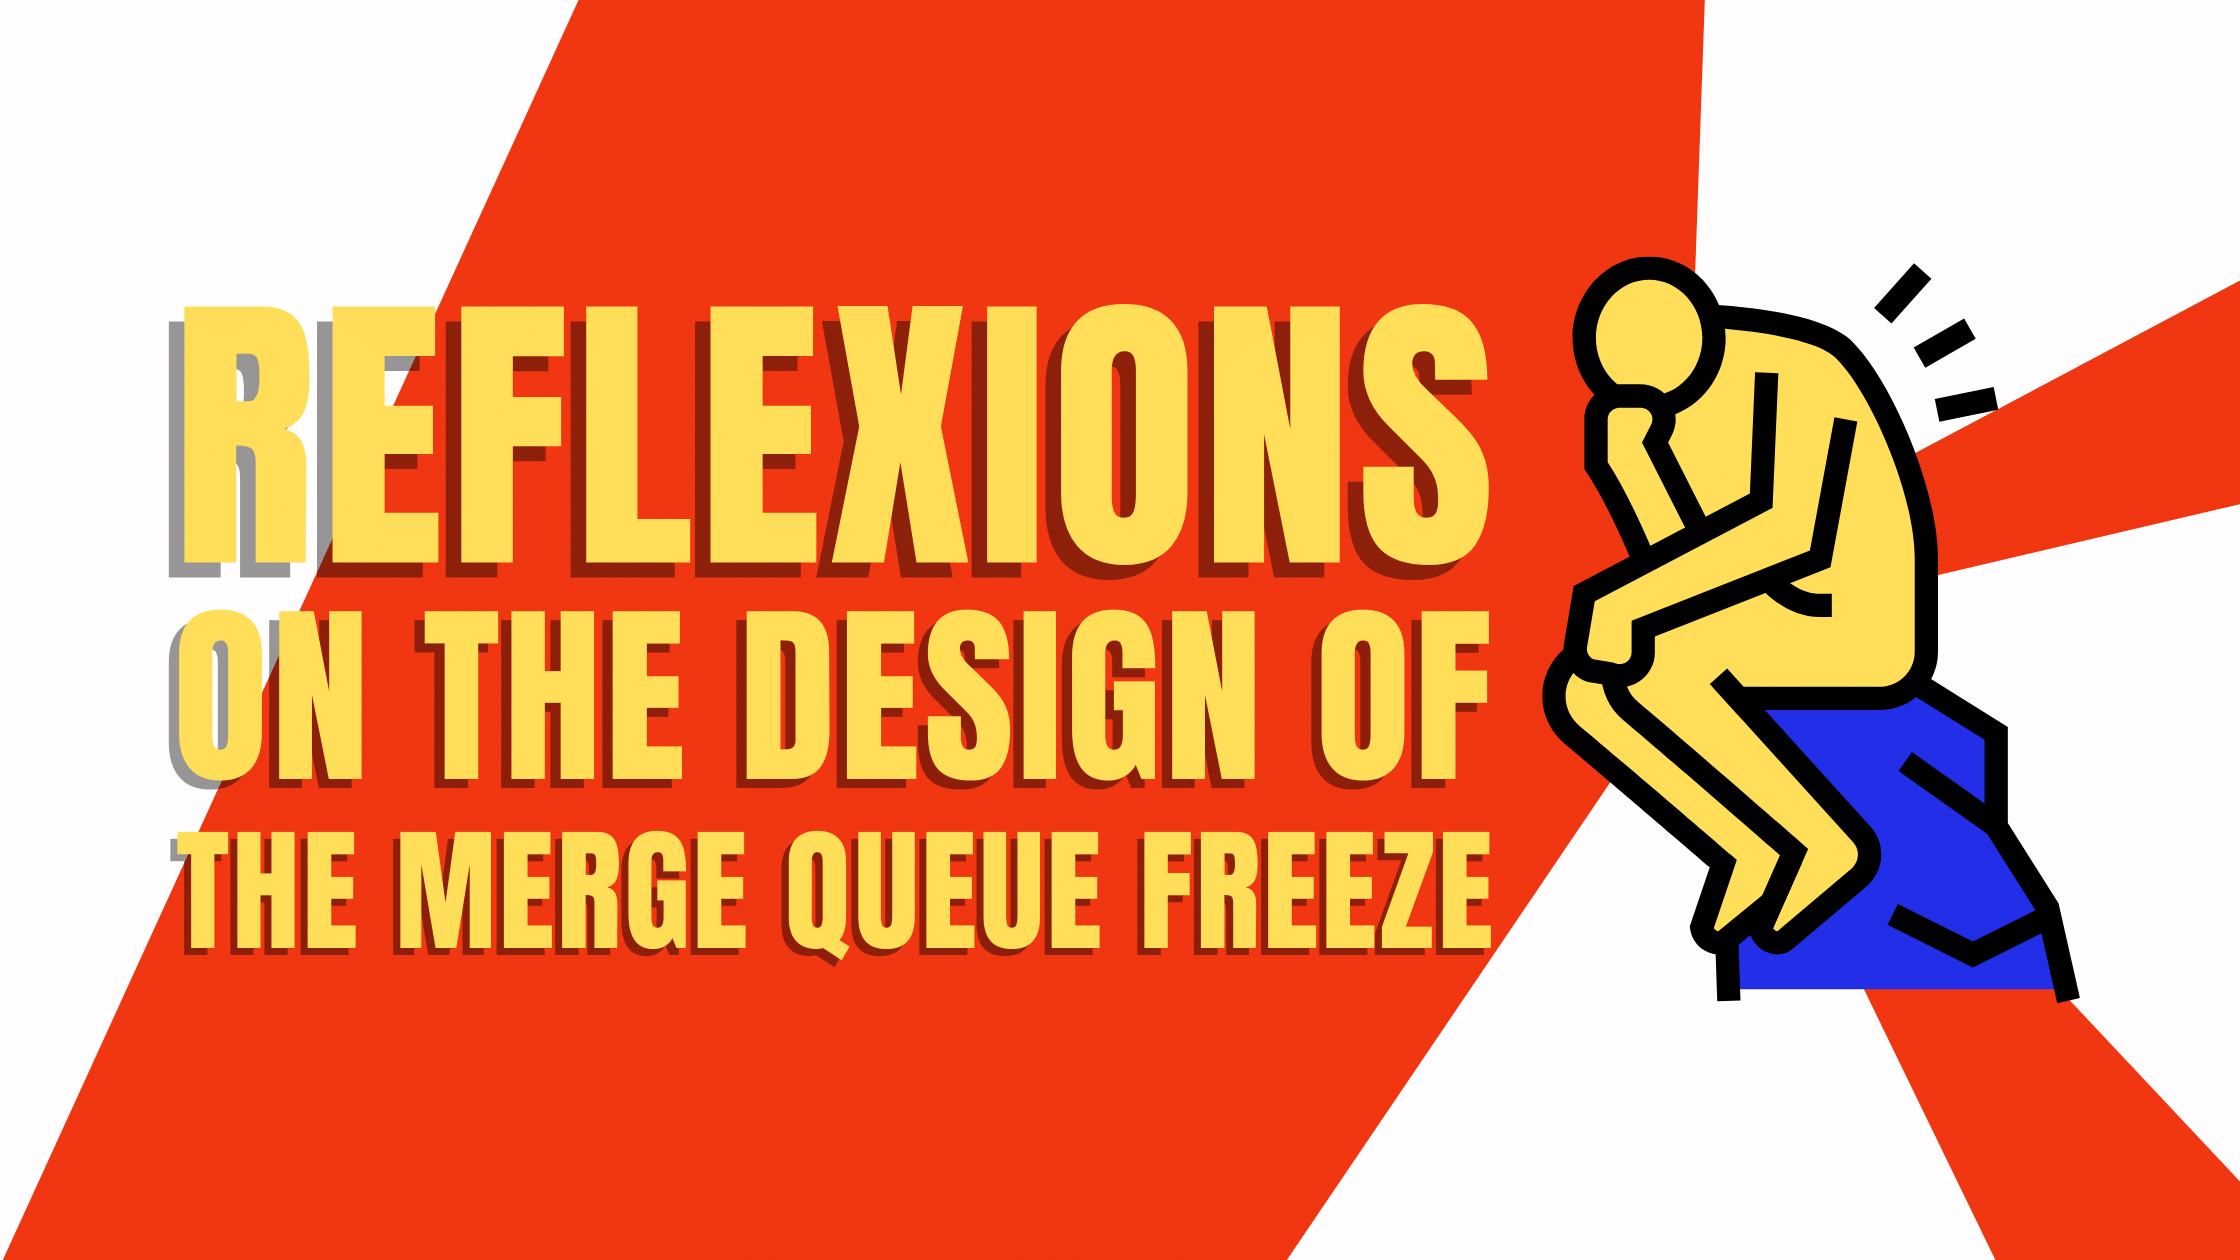 4 Reflexions on the design of the Merge Queue Freeze